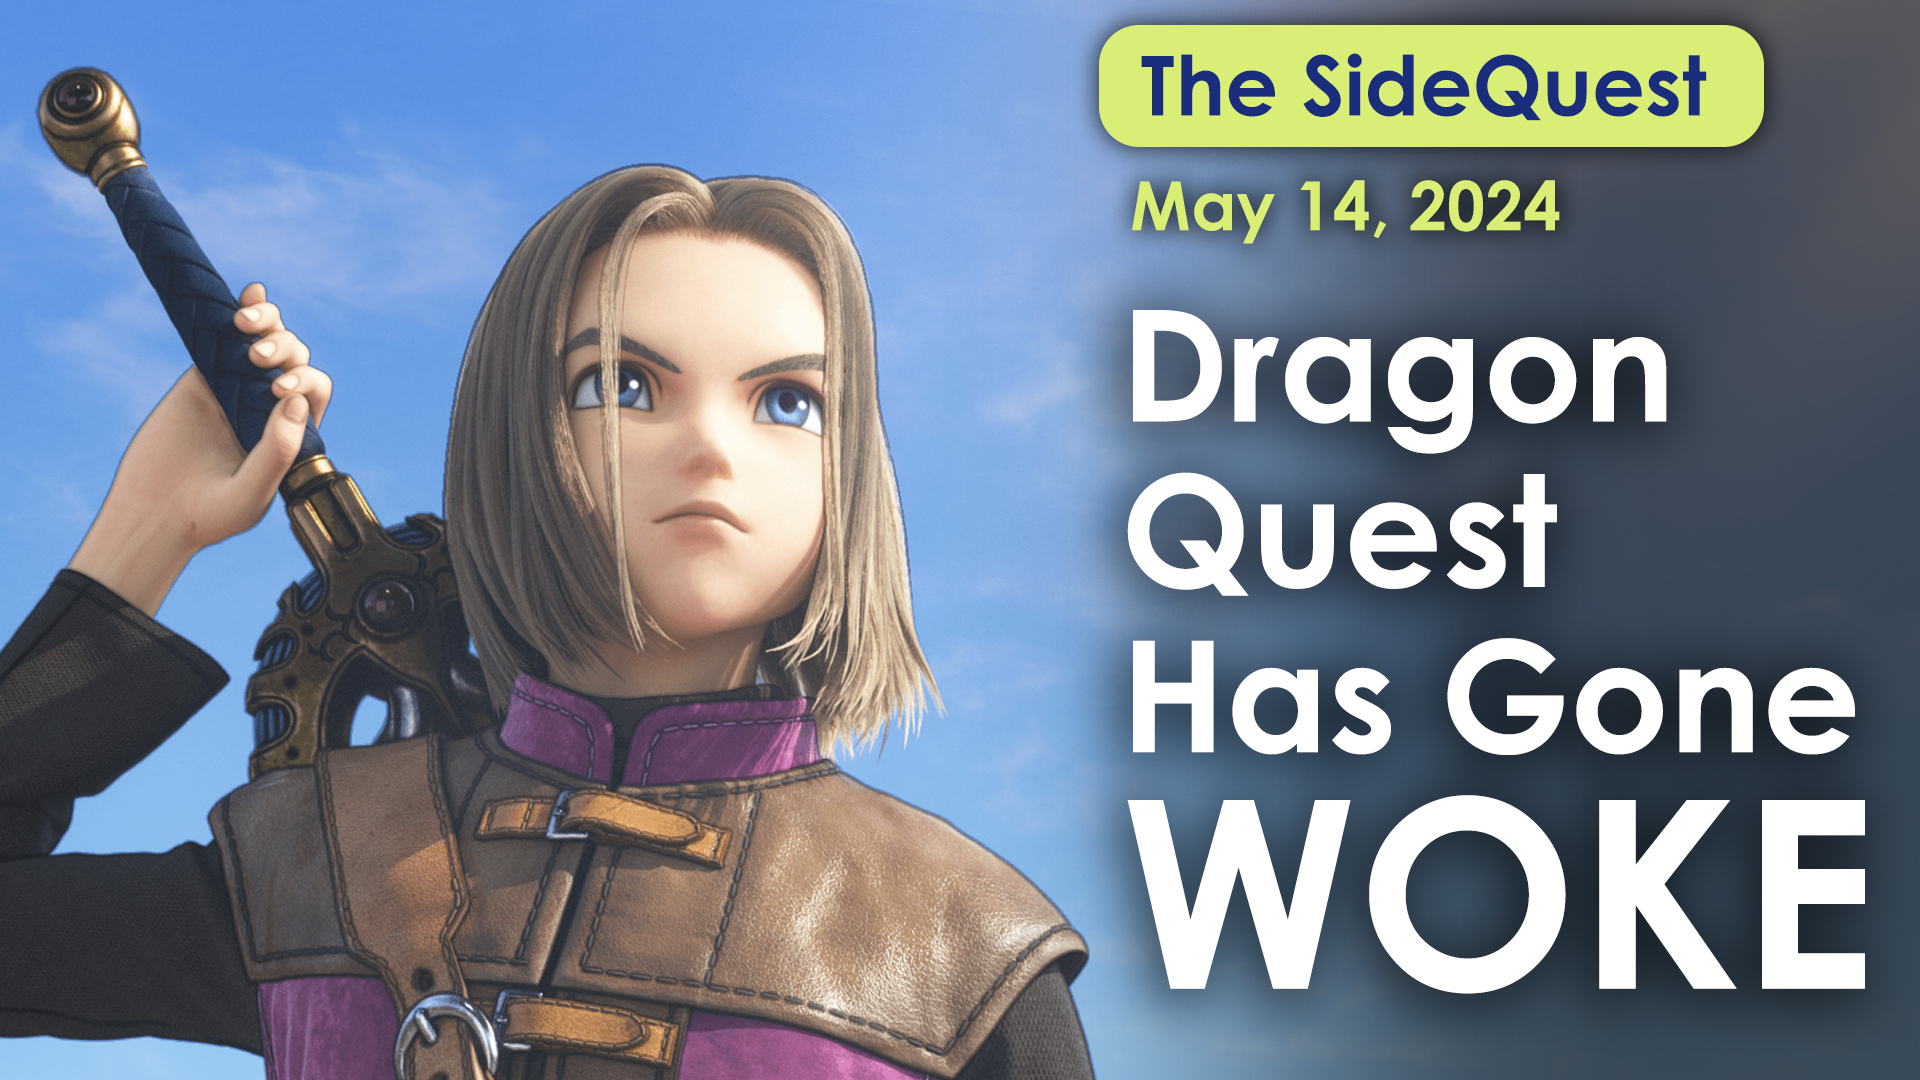 The SideQuest LIVE! May 14, 2024: Dragon Quest has gone WOKE